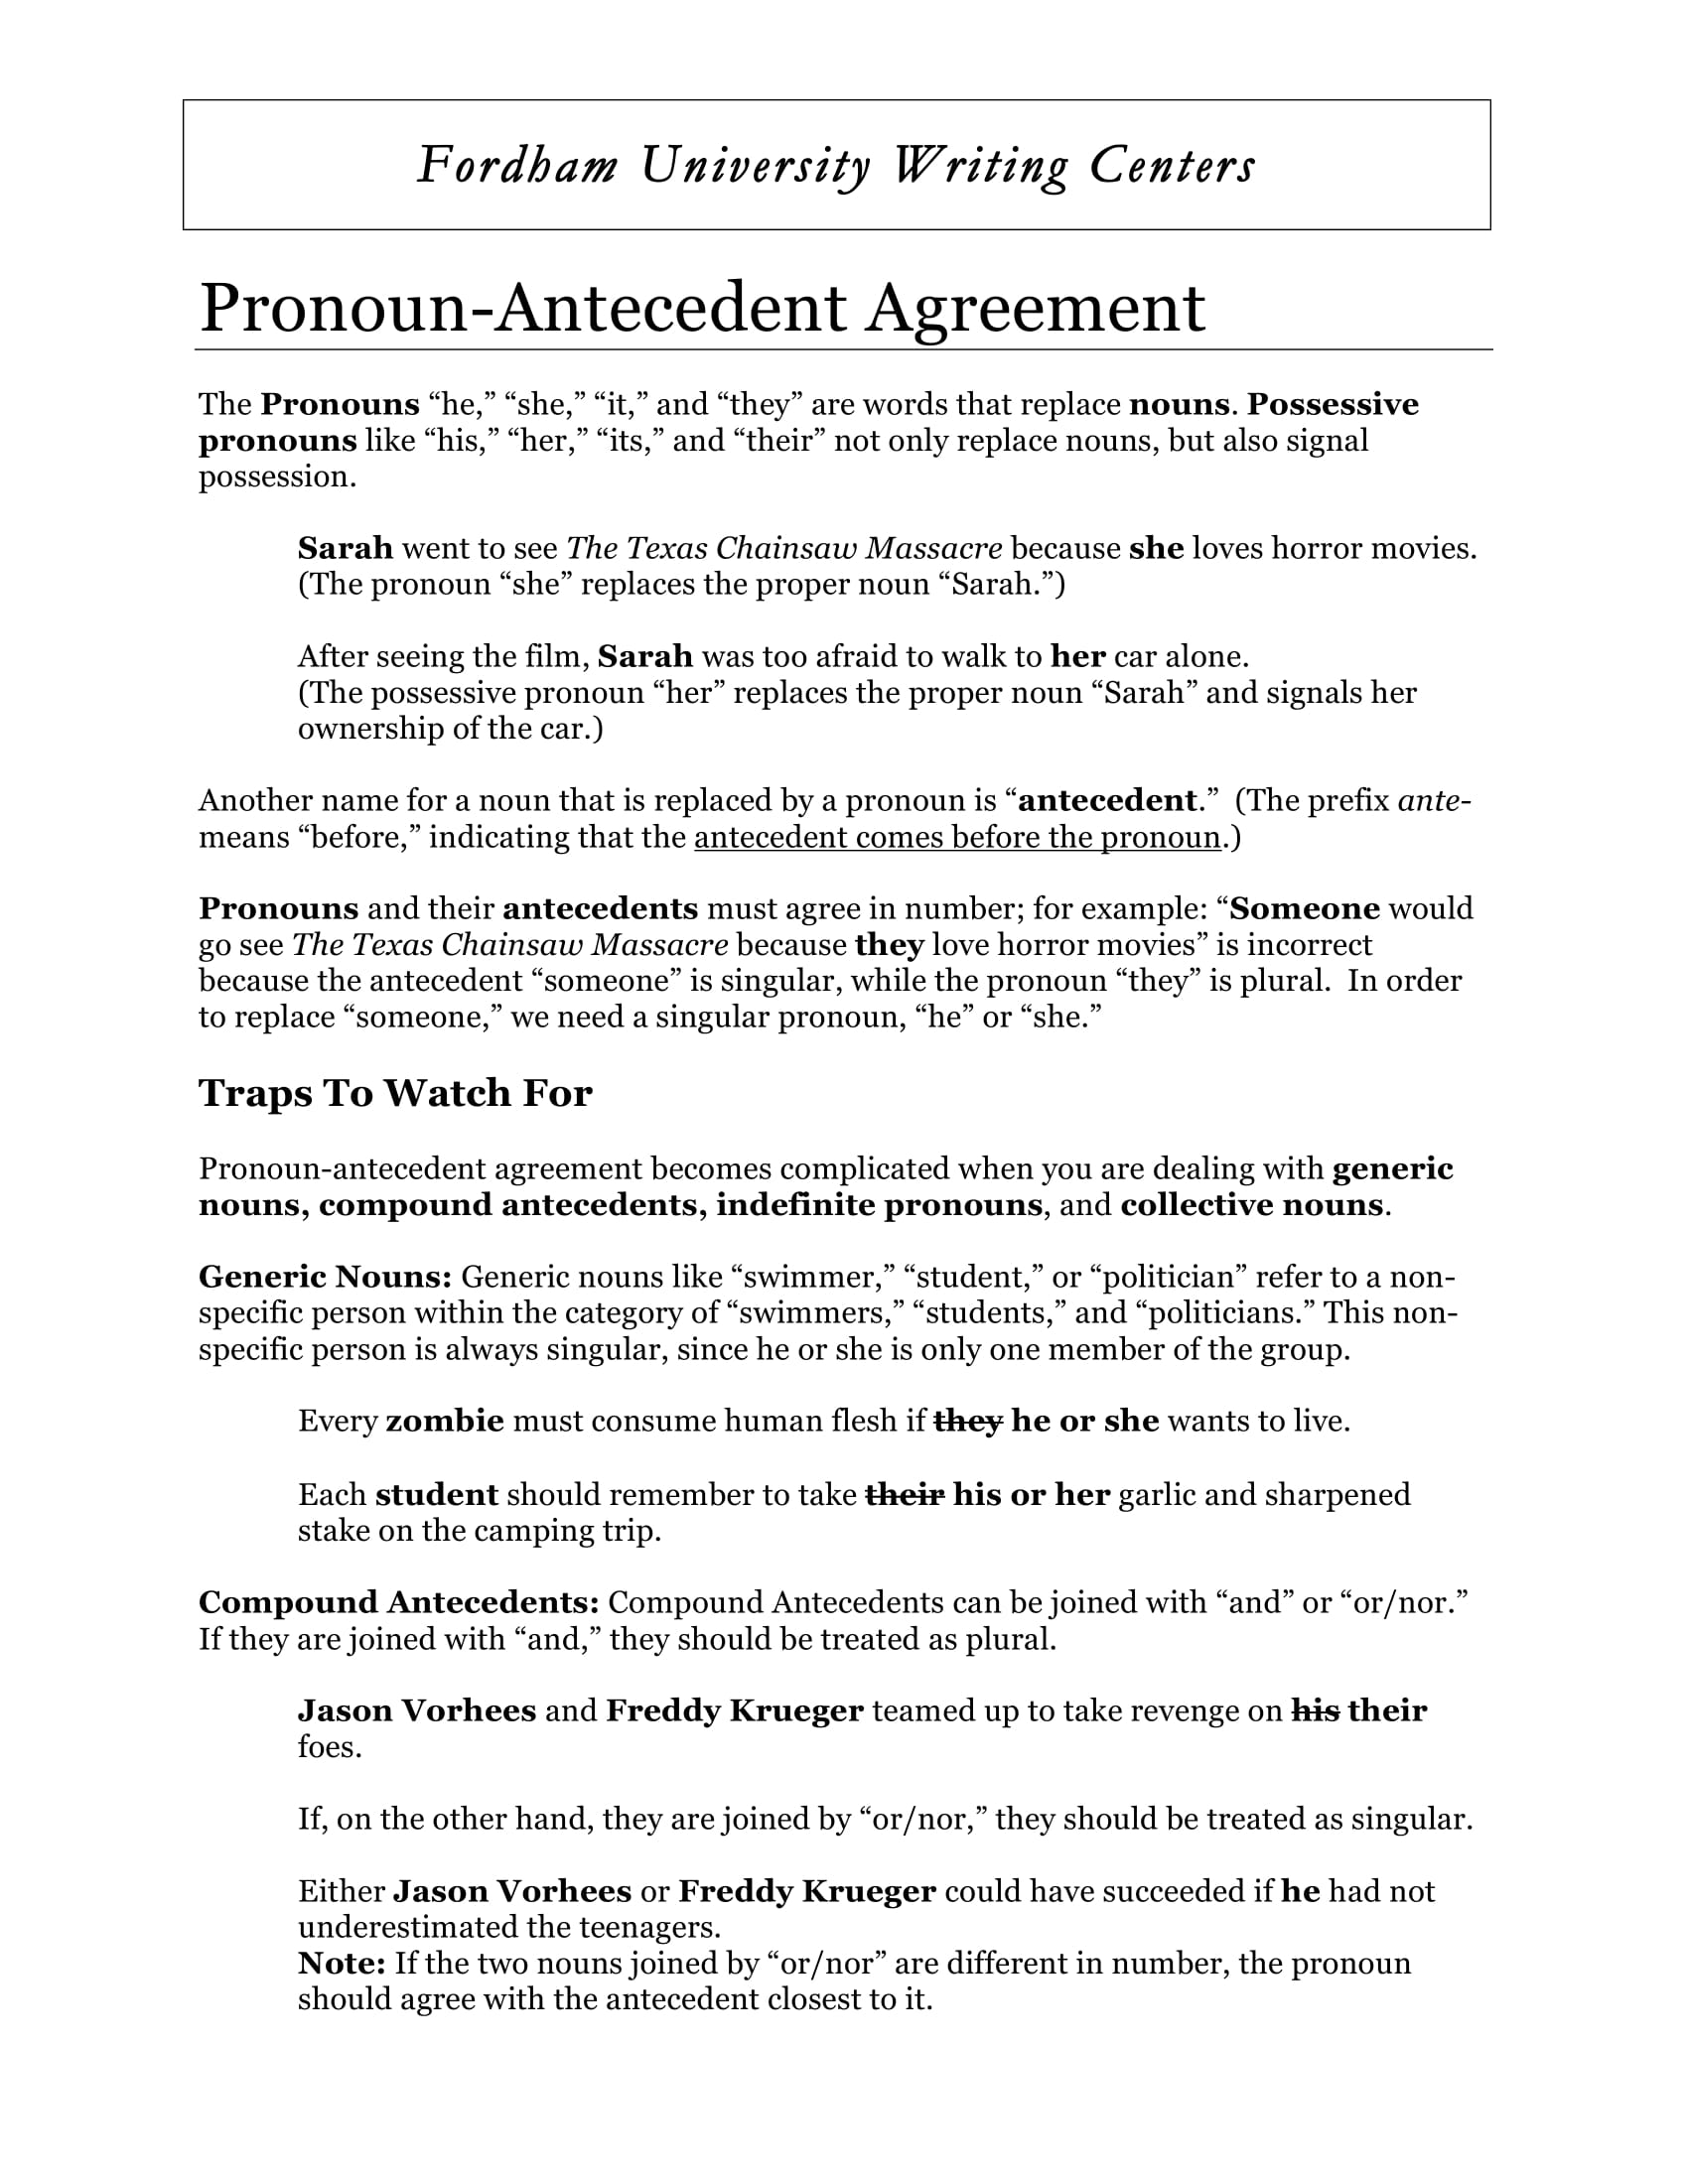 Agreement Of Pronouns And Antecedents